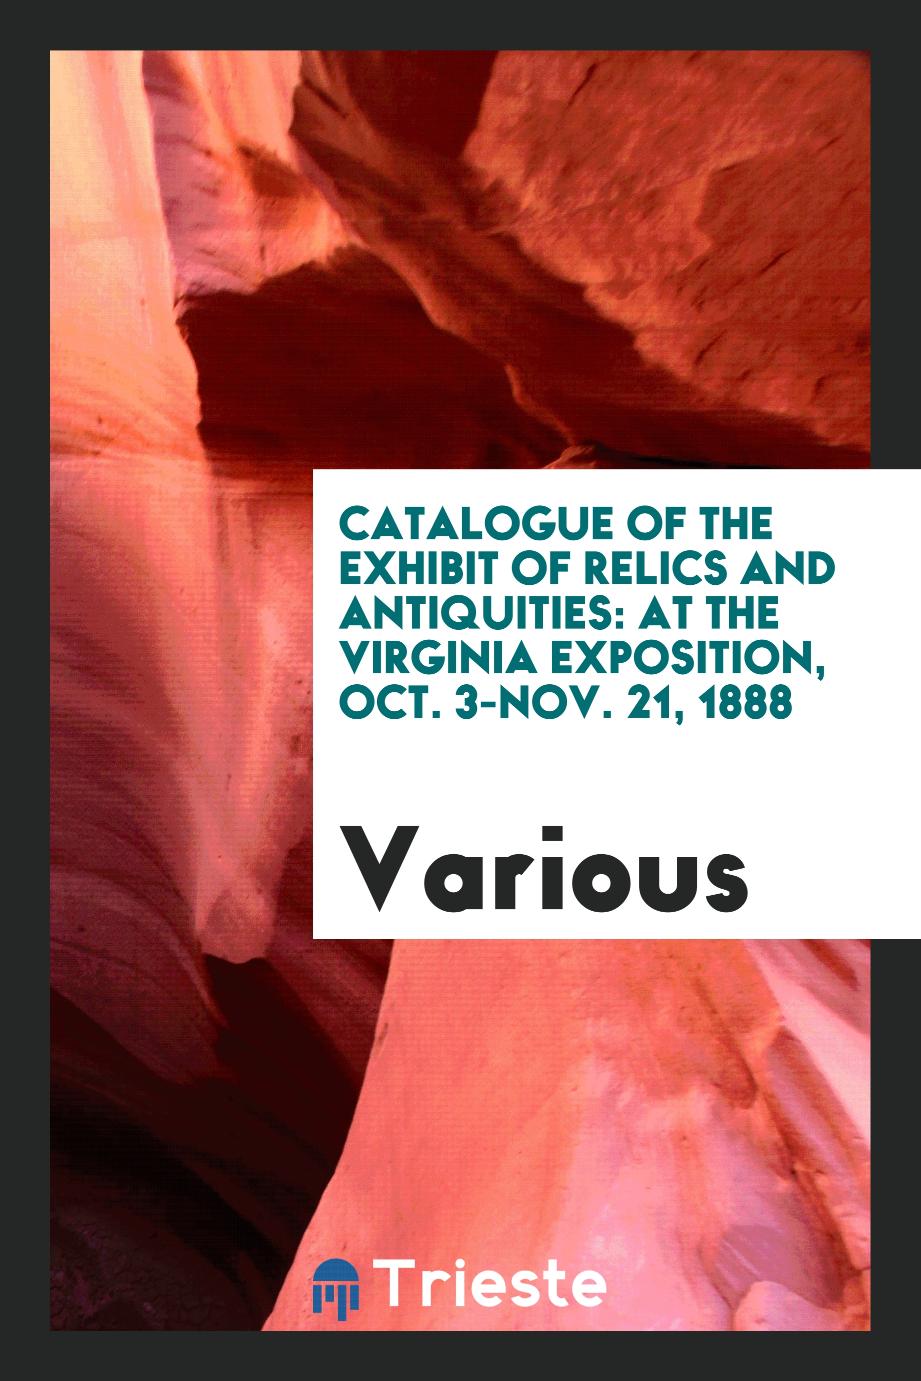 Catalogue of the Exhibit of Relics and Antiquities: At the Virginia Exposition, Oct. 3-Nov. 21, 1888